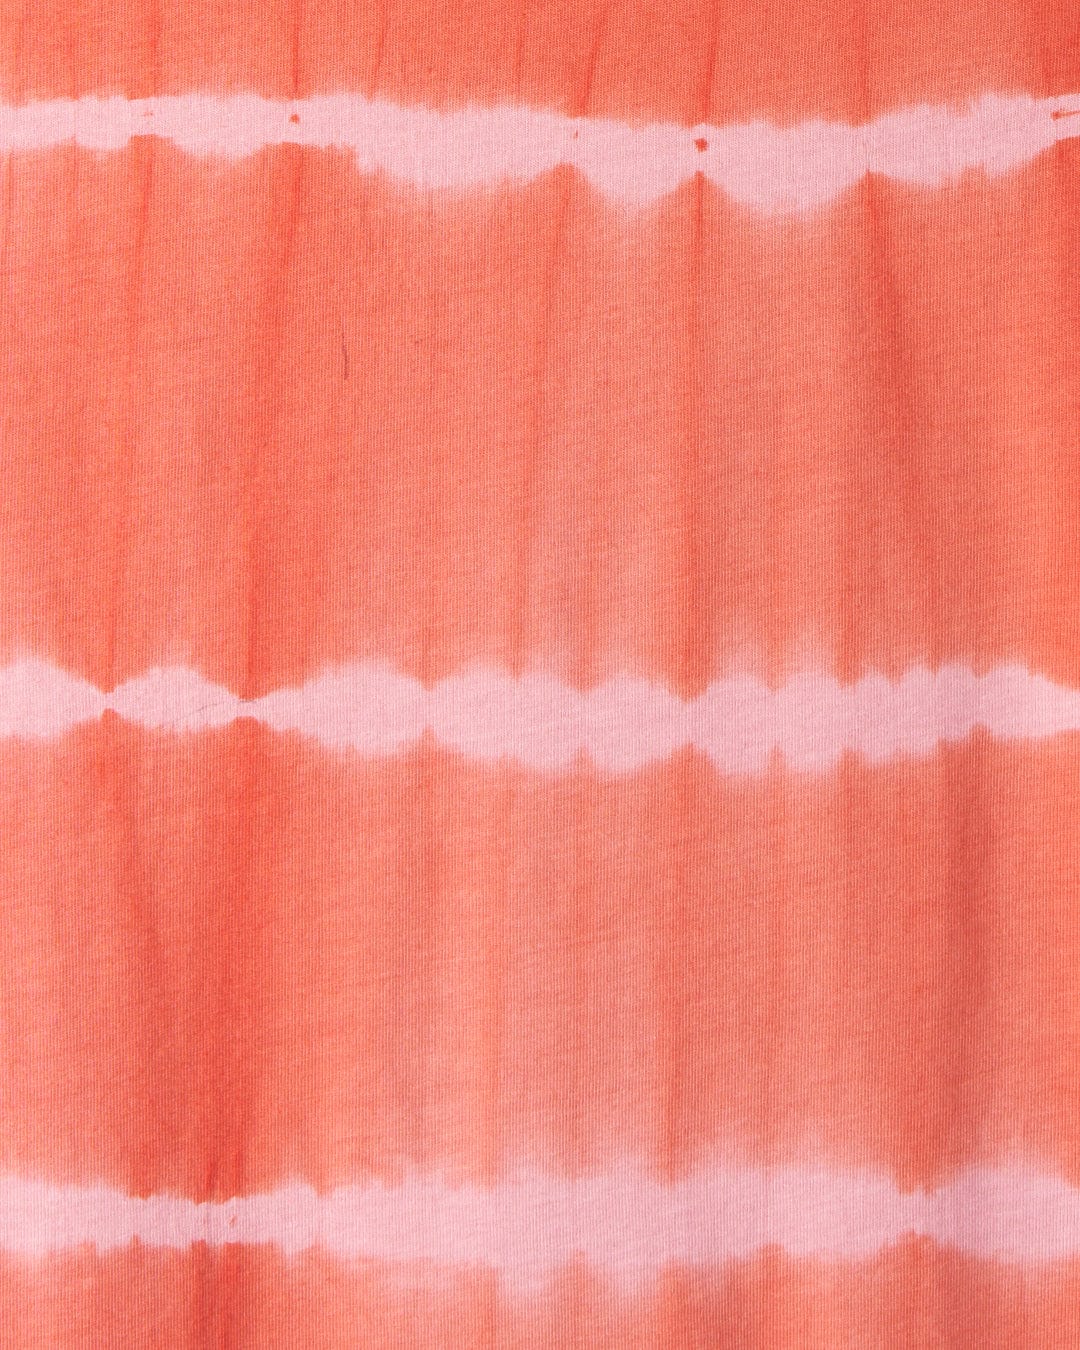 A close-up of the Eliana - Womens Tie Dye Vest Dress - Peach, adorned with subtle embroidered Saltrock branding.